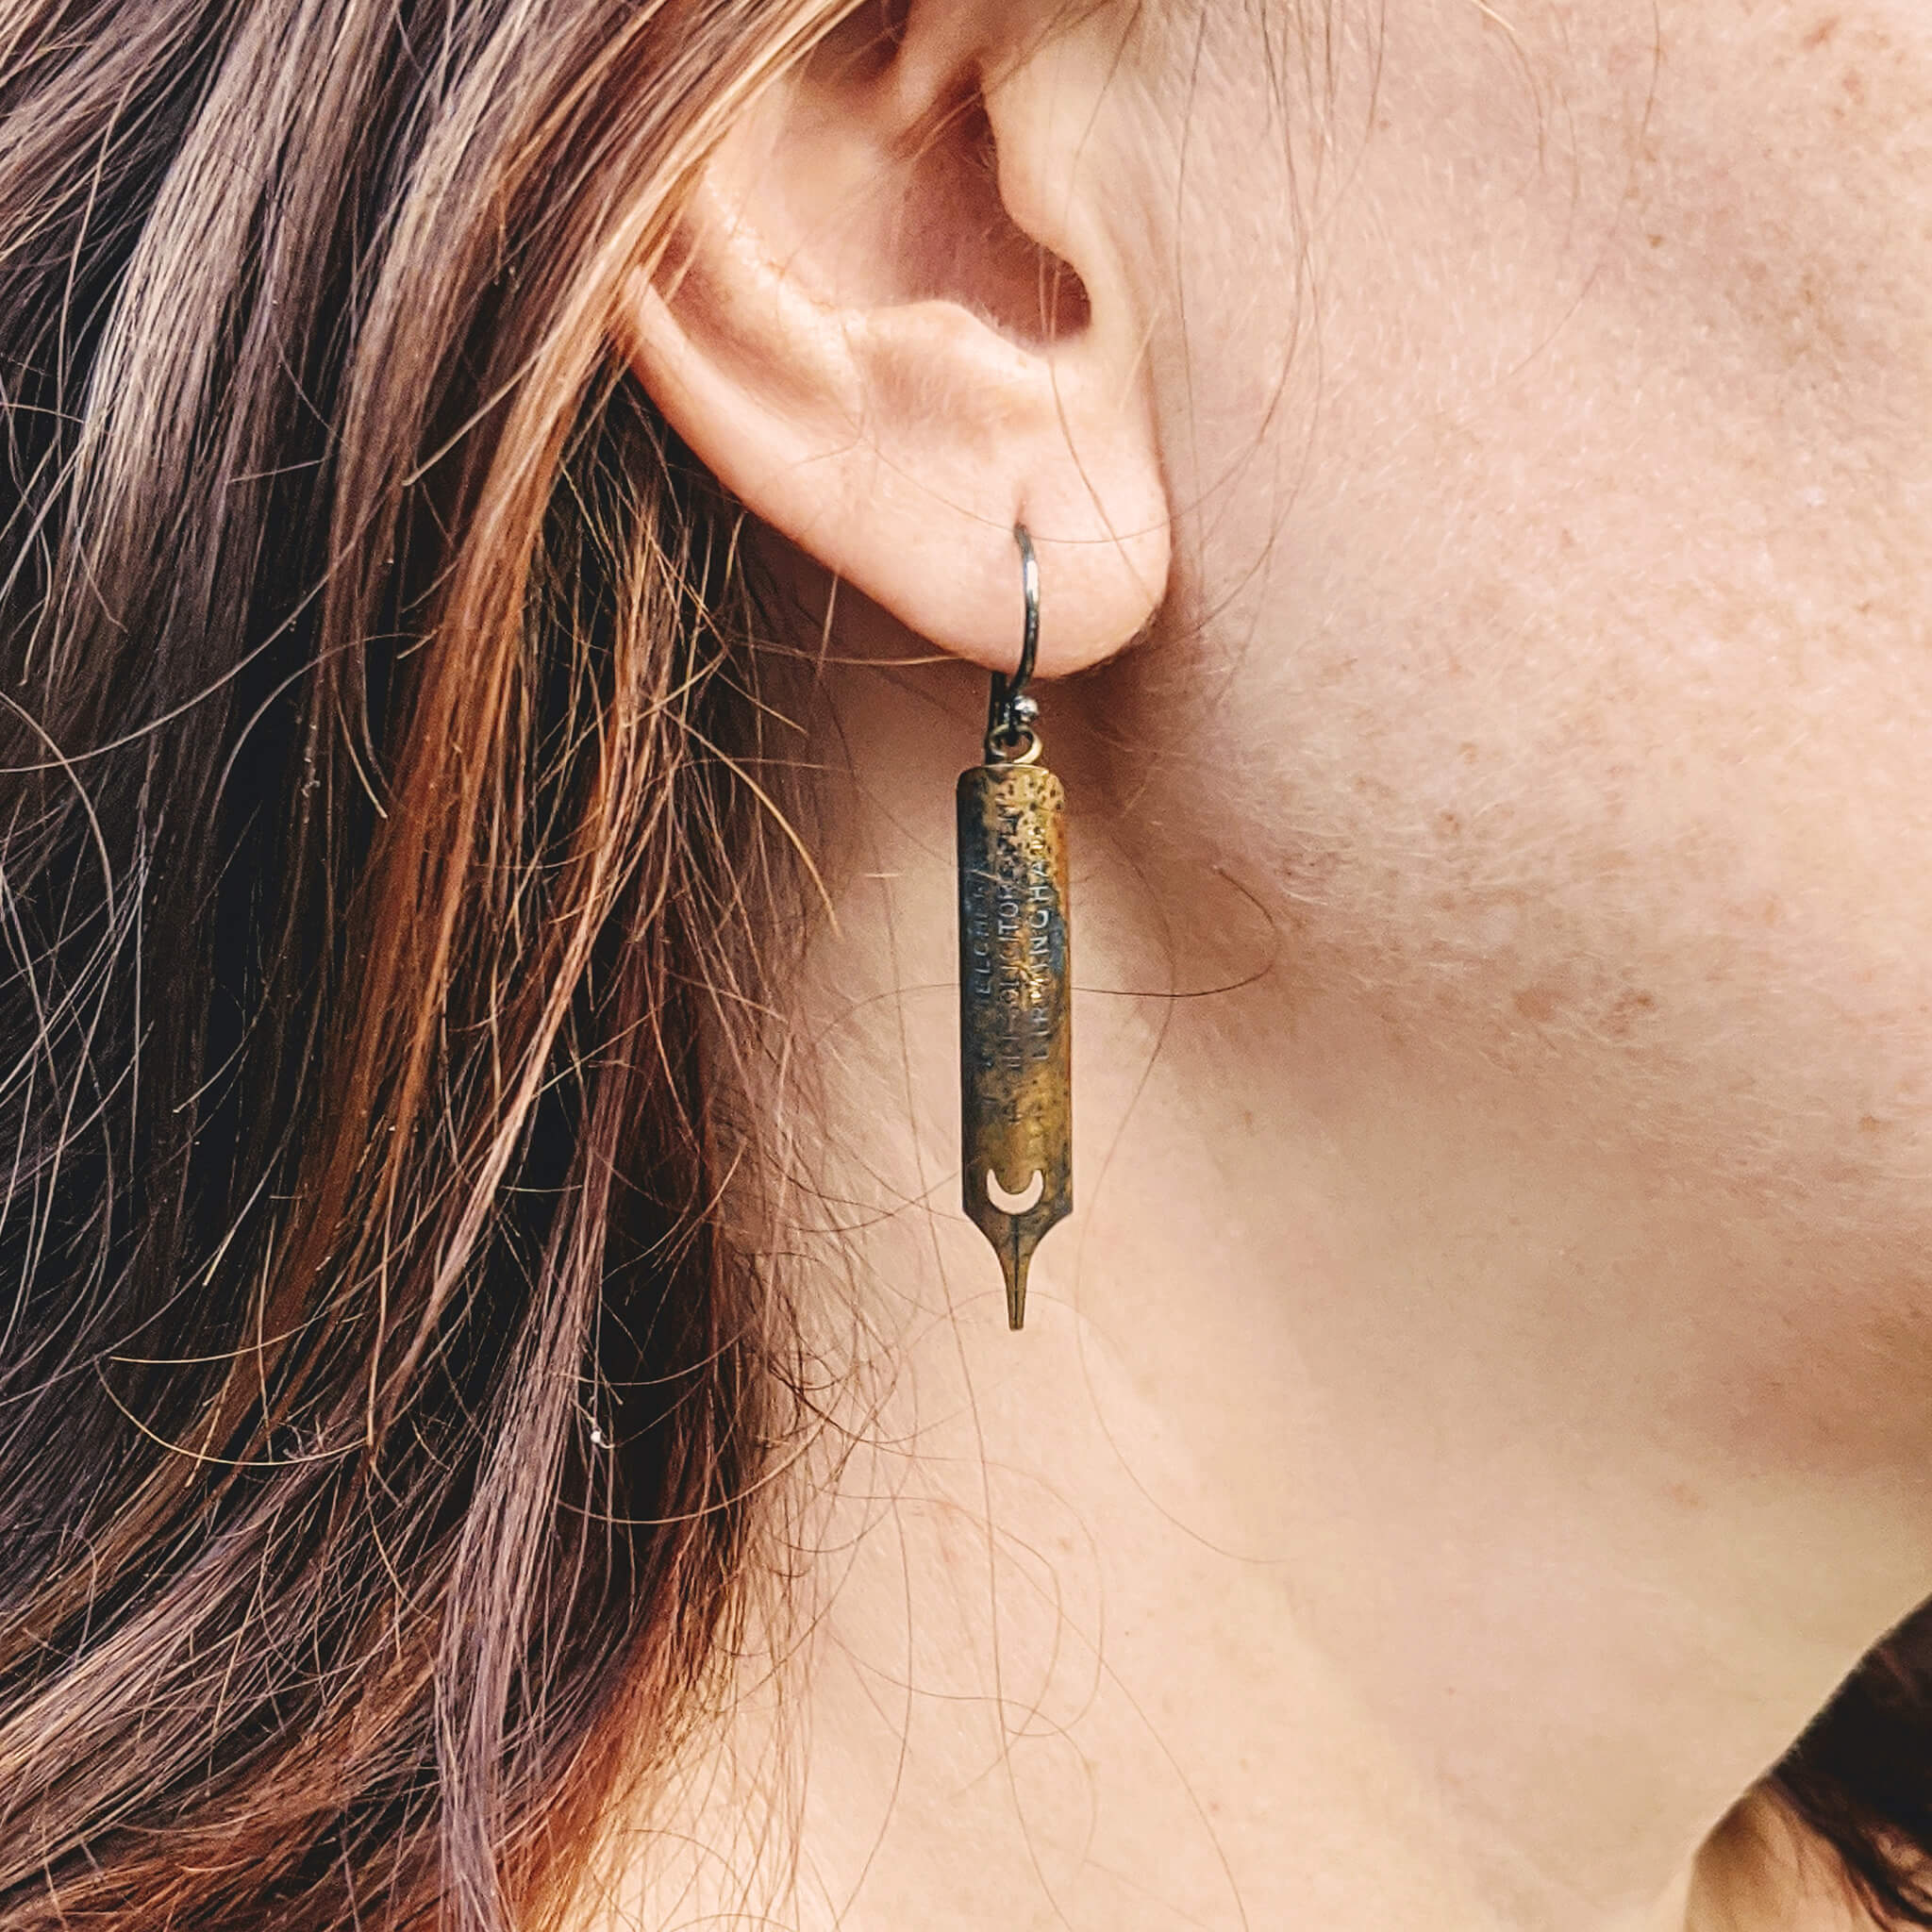 brunette woman's ear with antique gold pen nib earrings covered in patina